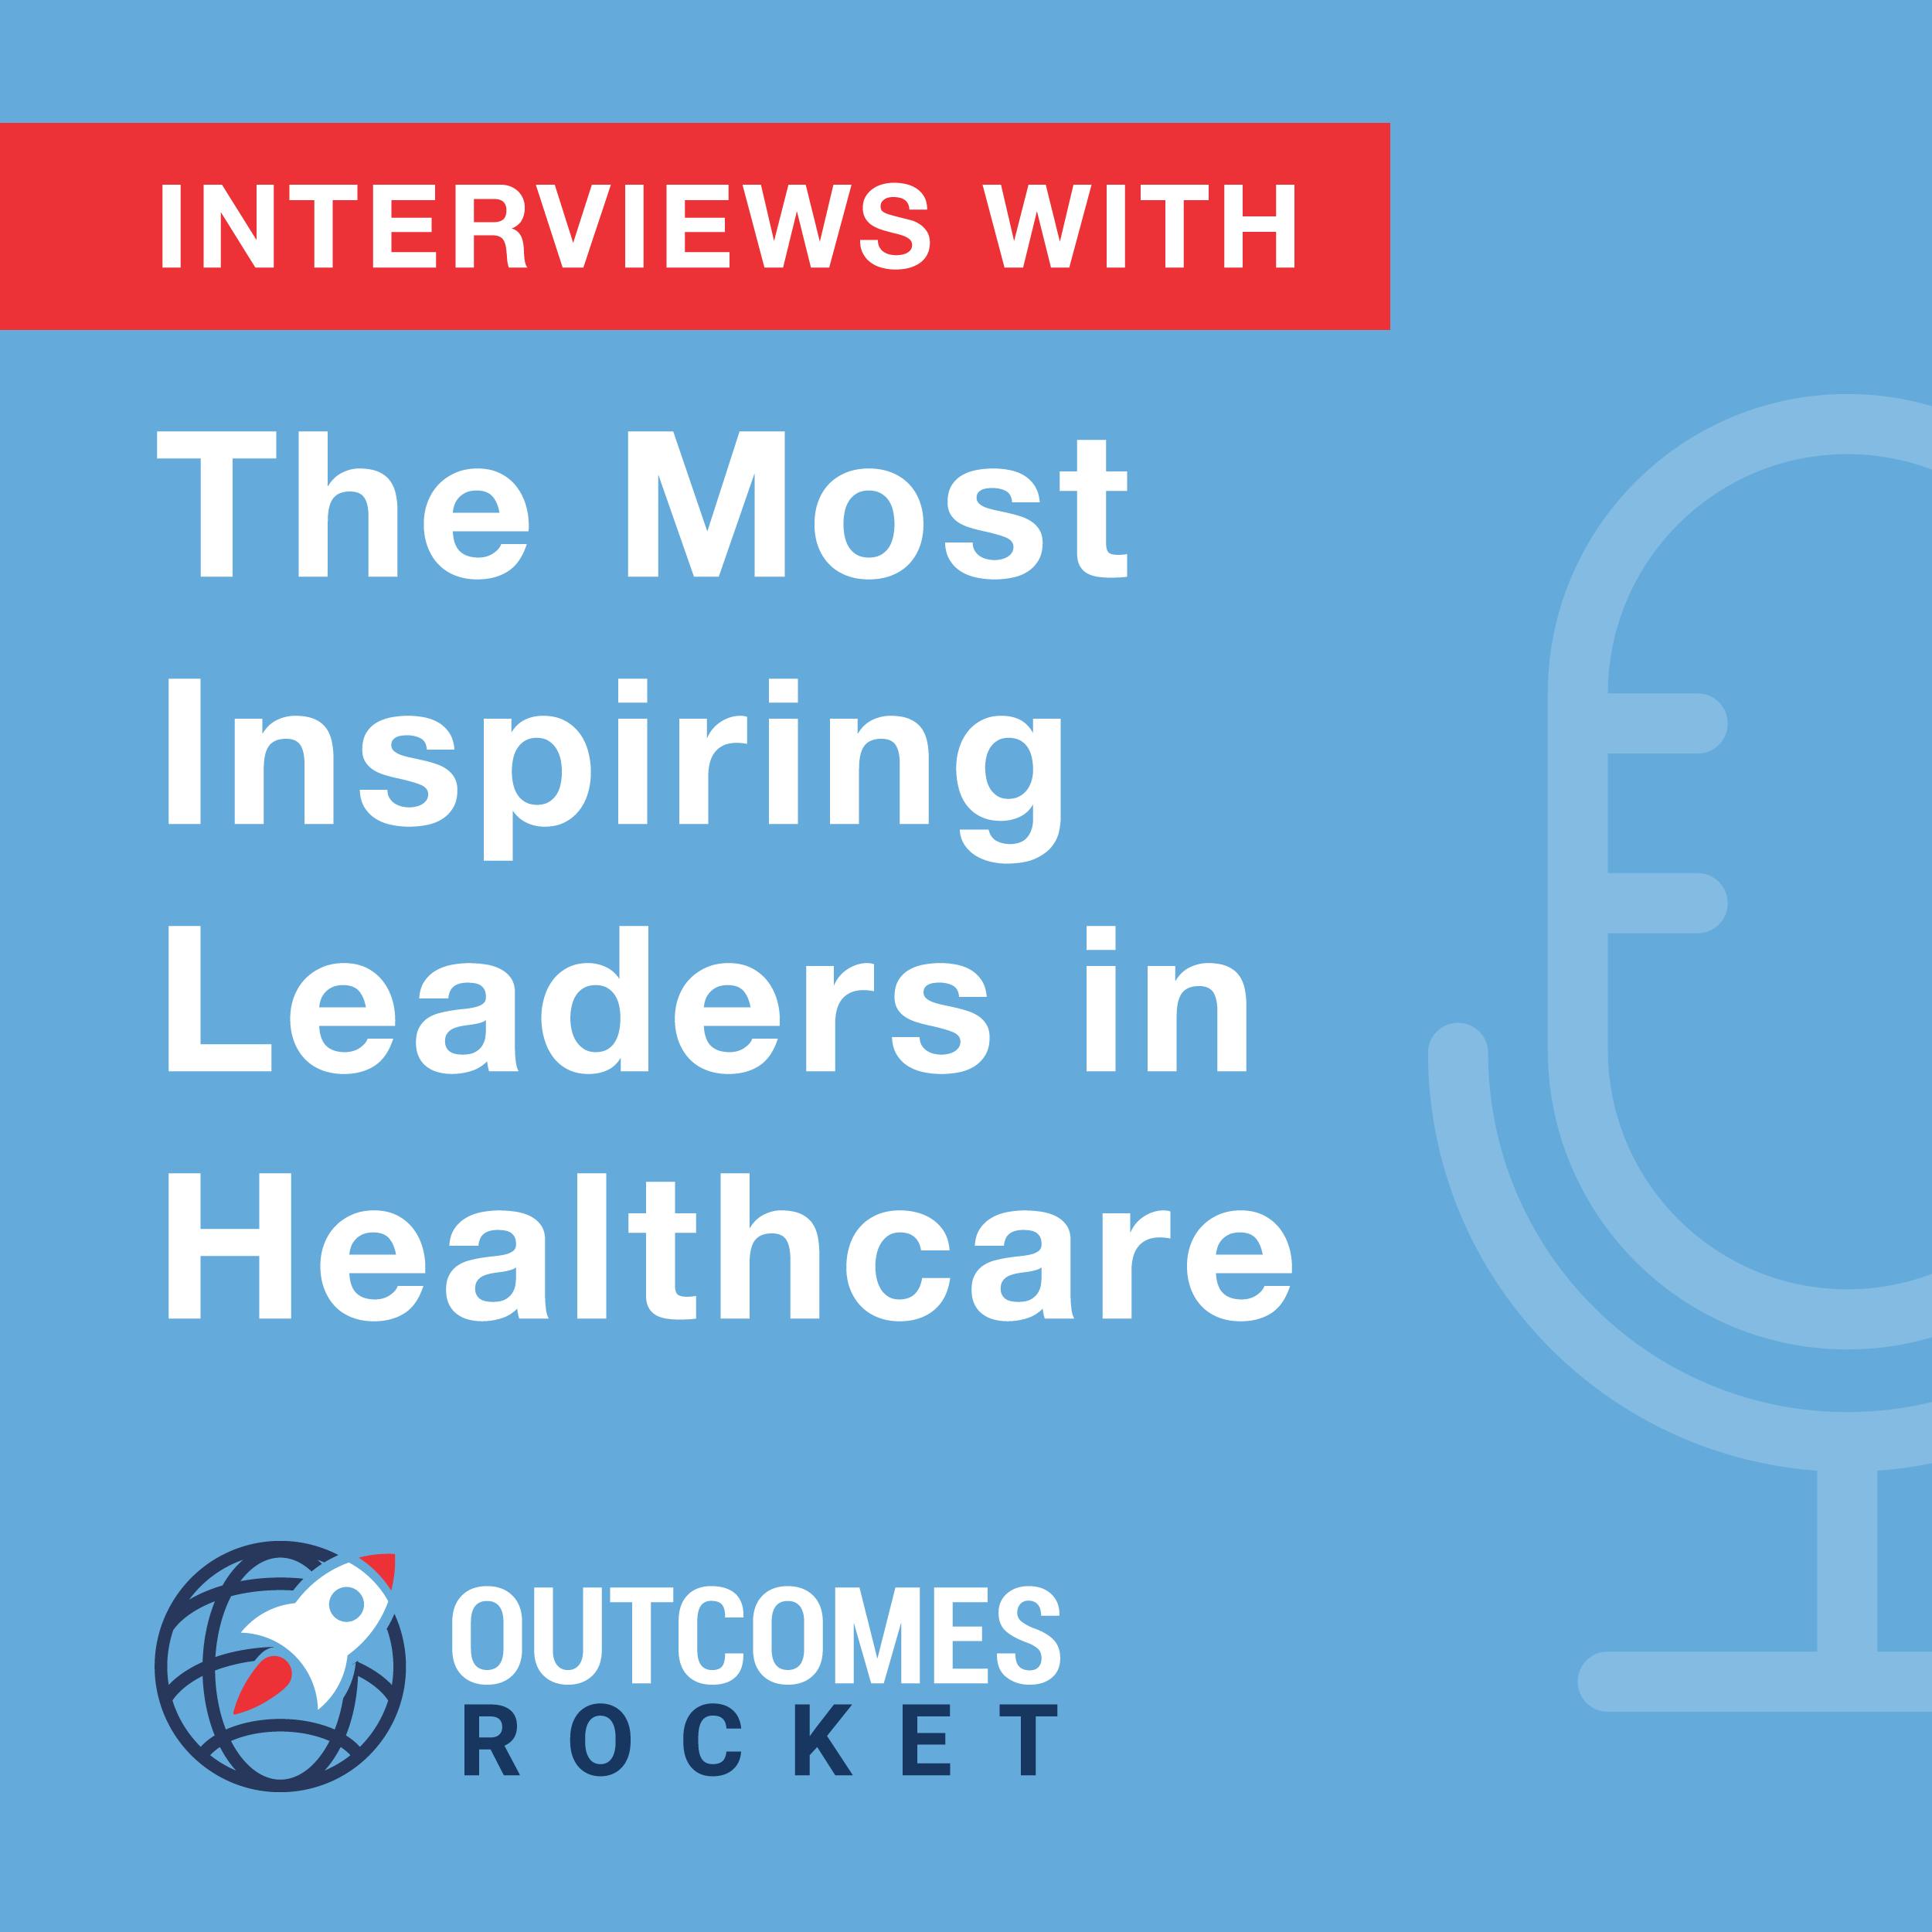 Thank You!  A New Year’s Message for Health Leaders with Saul Marquez, Outcomes Rocket Podcast Host